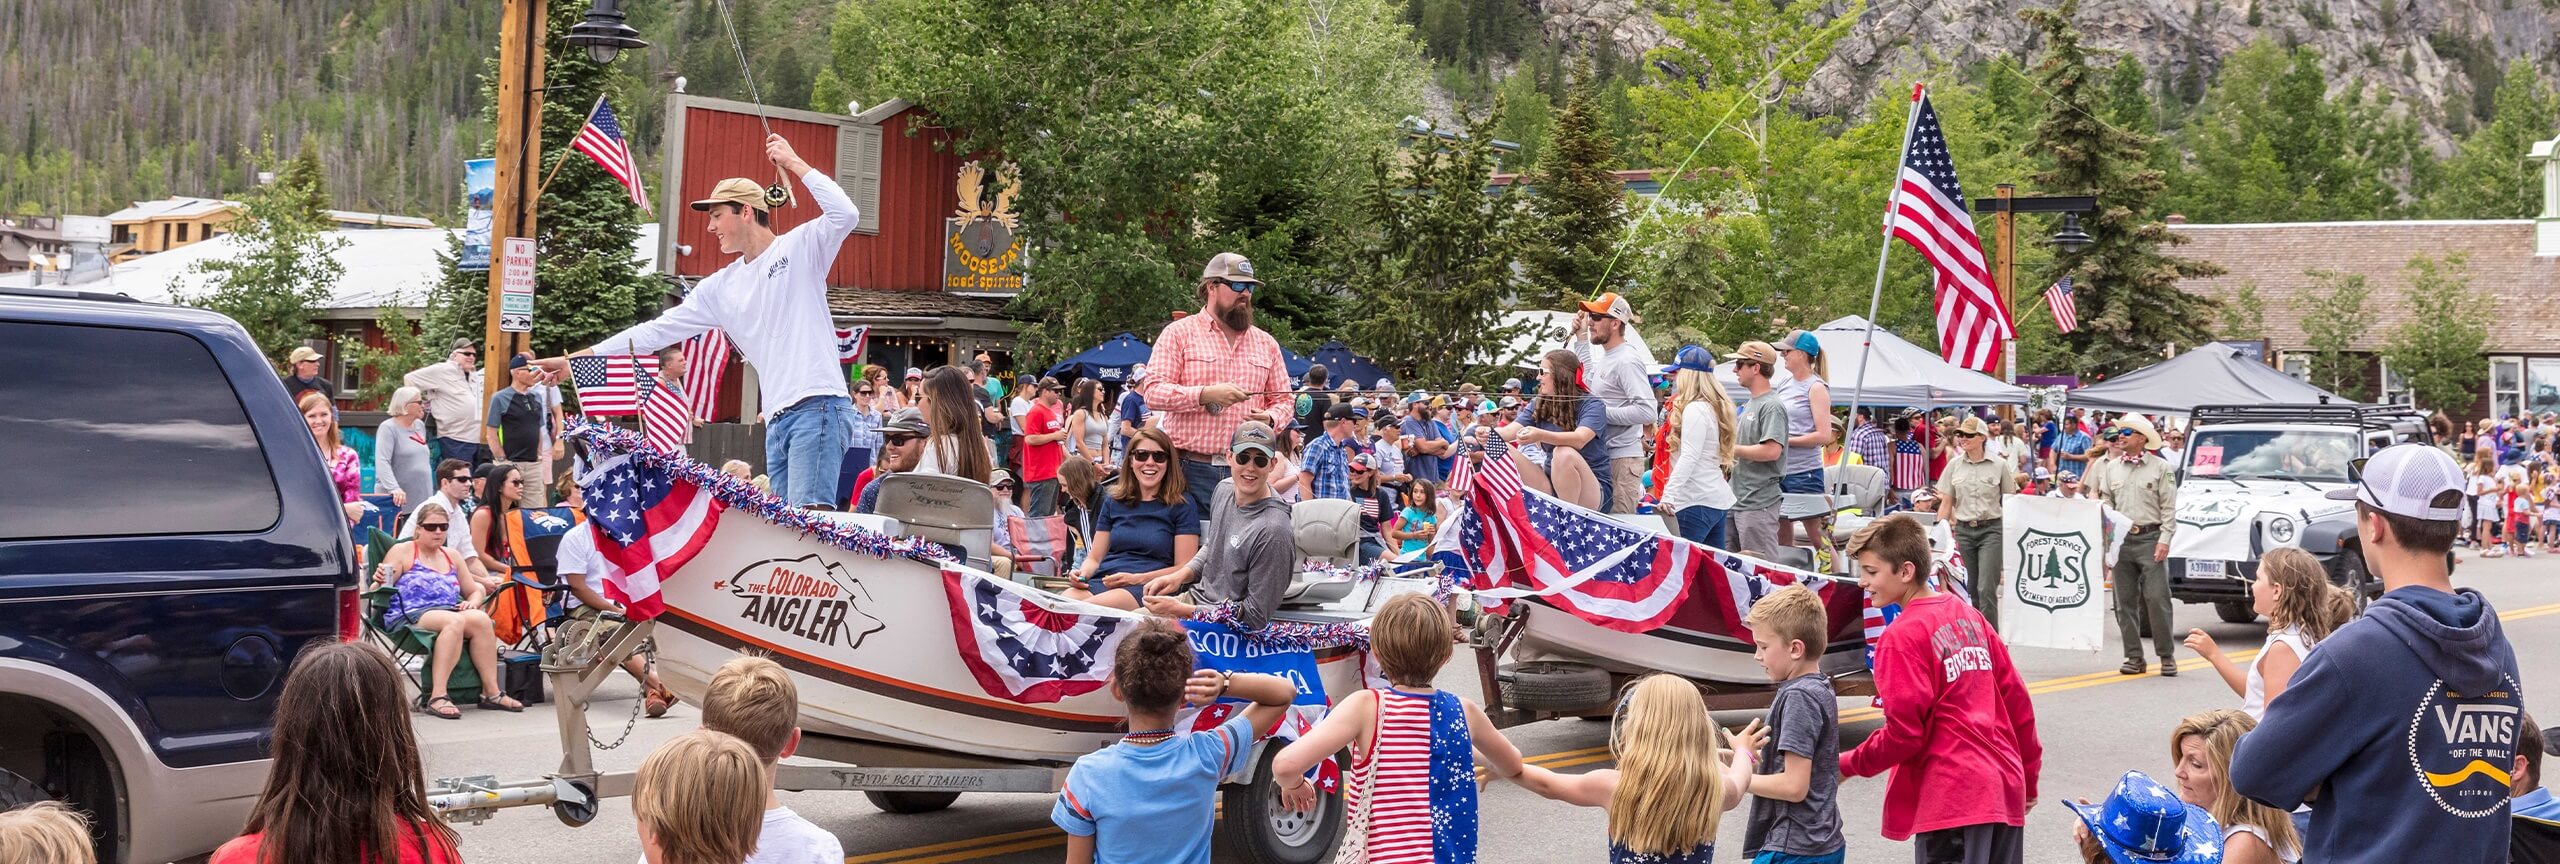 Frisco 4th of July parade with fishing boat float